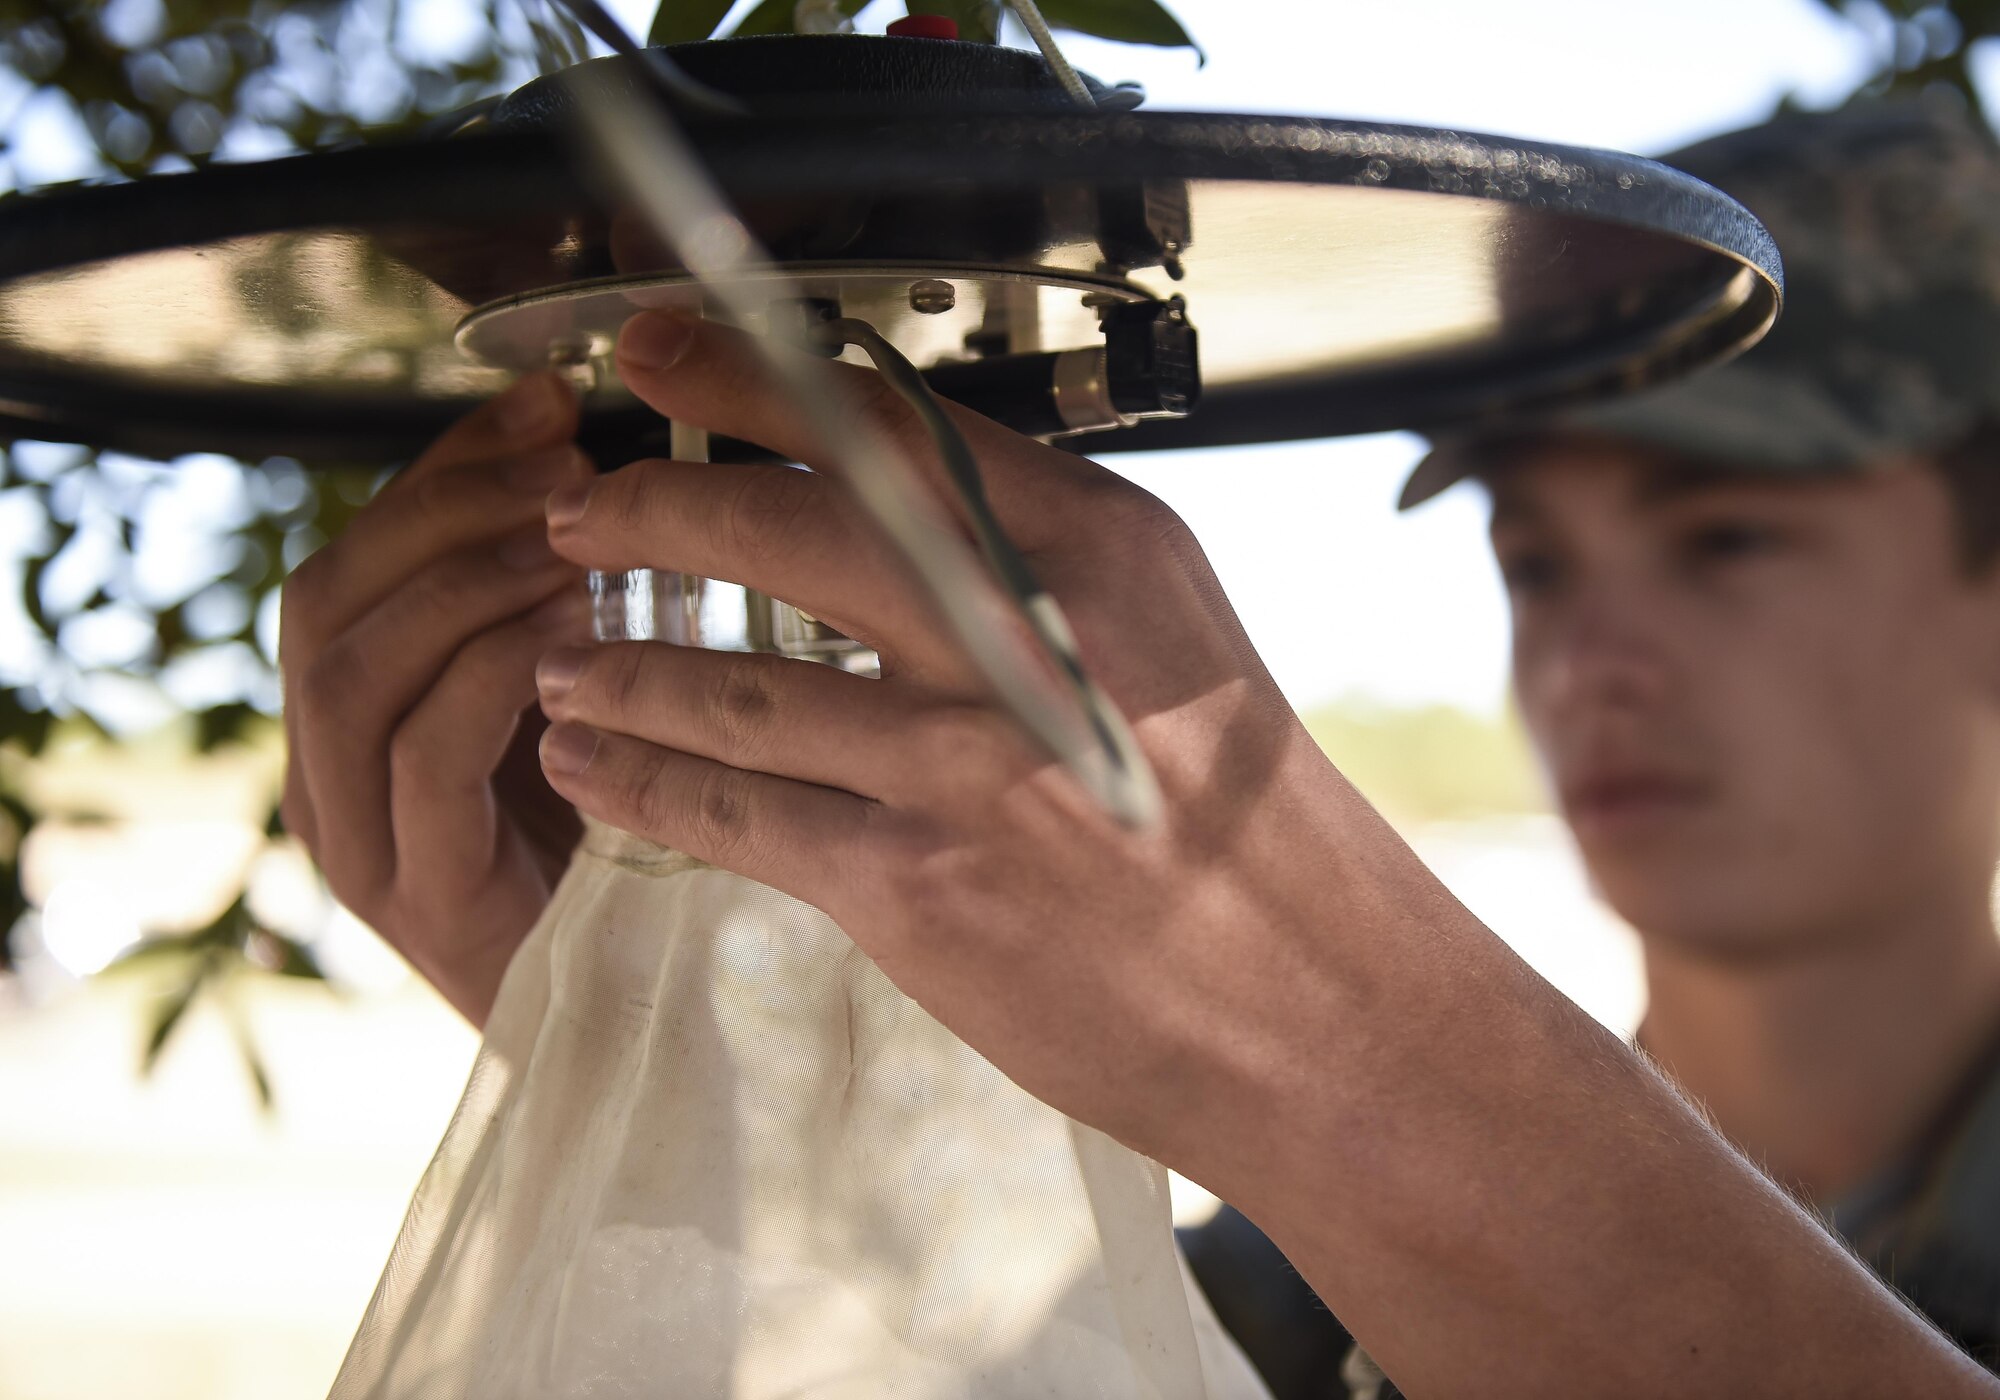 Airman 1st Class Kyle Engle, a public health technician with the 1st Special Operations Medical Group, hangs a mosquito trap in a tree at Hurlburt Field, Fla., Feb. 5, 2016. The mosquito traps will be hung around Hurlburt to catch specimens for later identification in a lab at Wright-Patterson Air Force Base, Ohio. (U.S. Air Force photo by Airman 1st Class Kai White)
